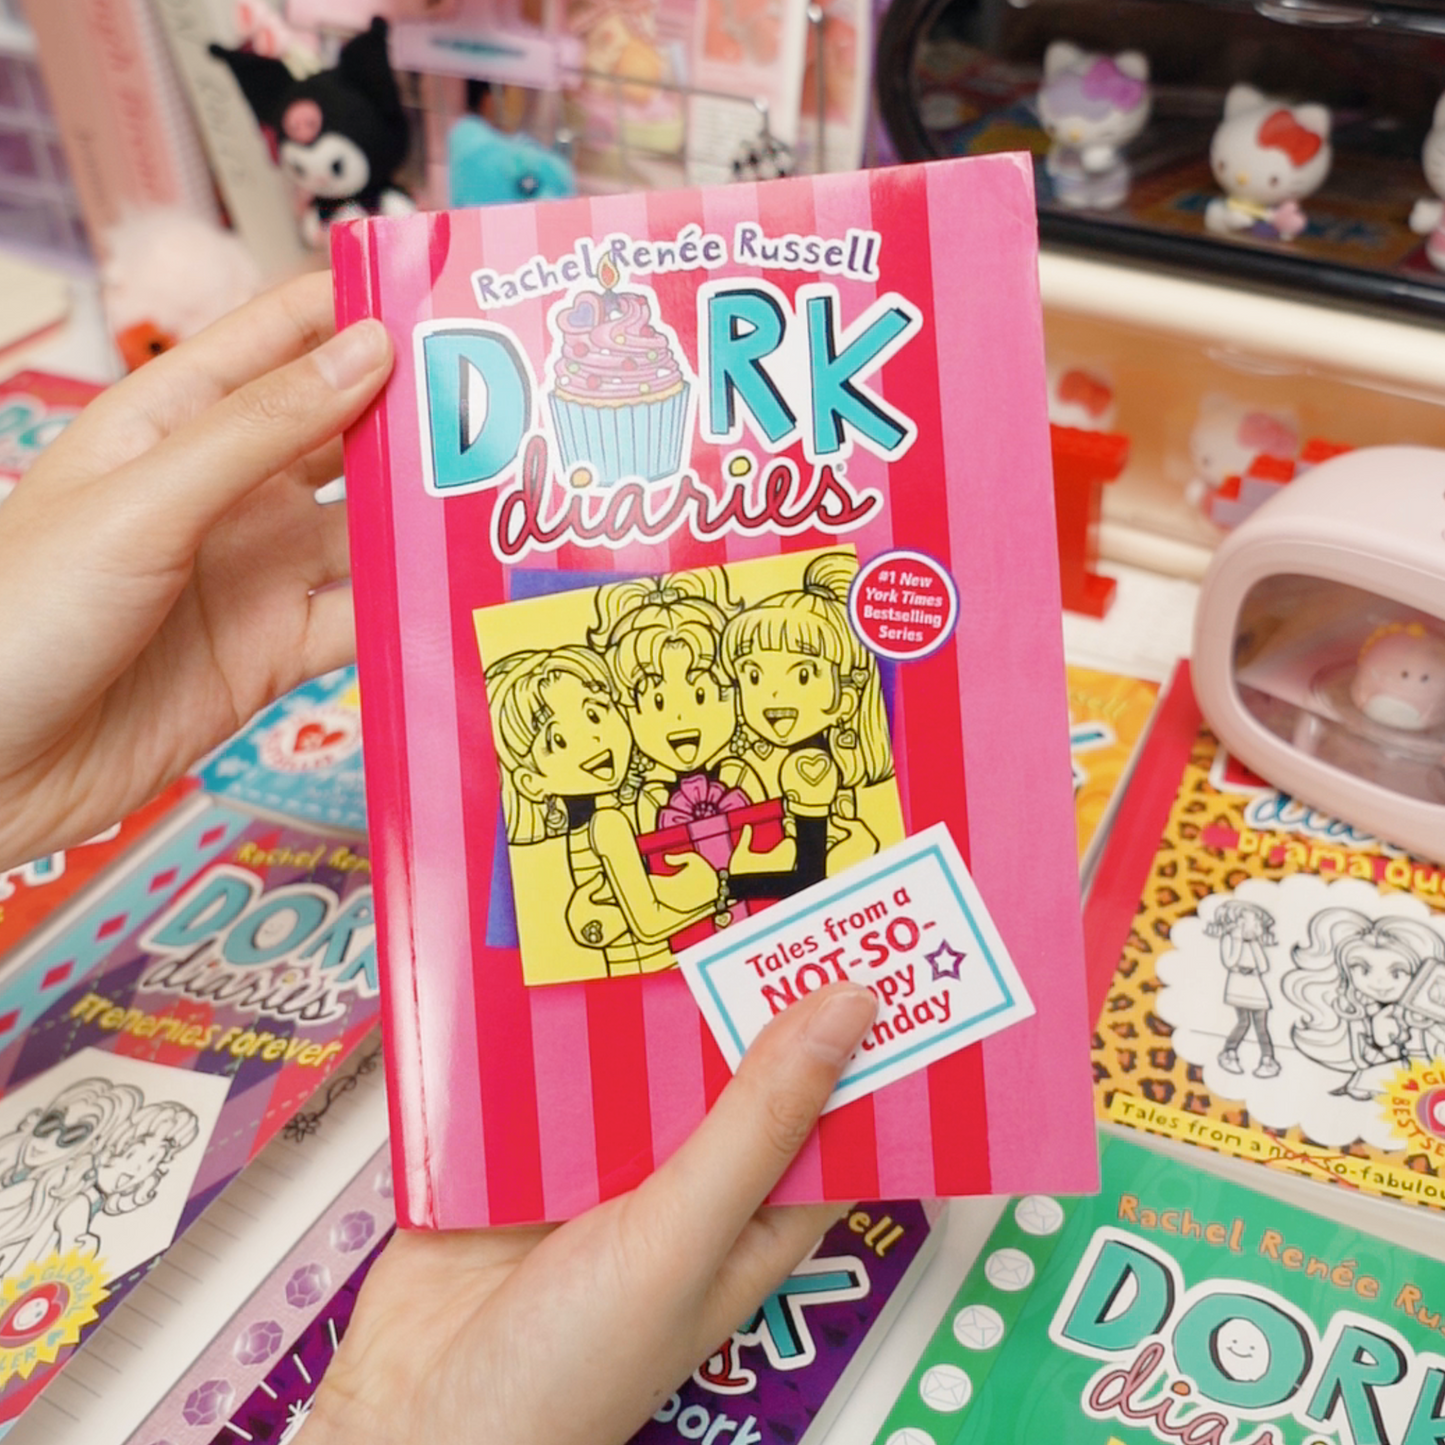 Glamore Selection Tales from a Not-So-Happy Birthday by Rachel Ren Russell Dork Diaries 13